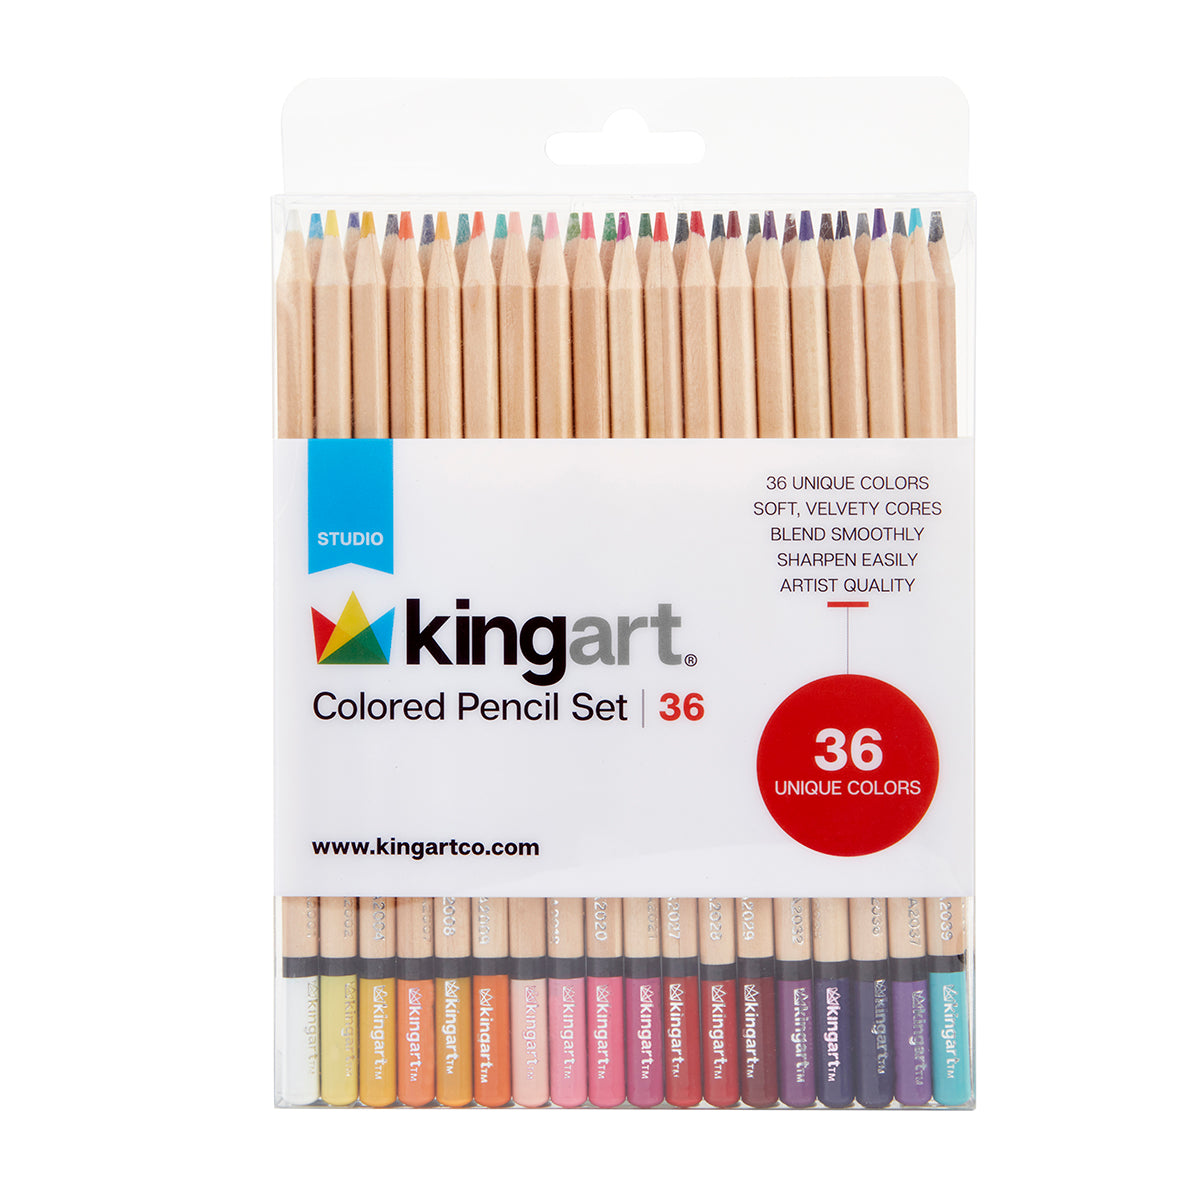 Colored Mechanical Pencils 36 Count, No Sharpening Colored Pencils for Adult Coloring, Smooth Soft Creamy Core Color Pencil Set, Premium Assorted